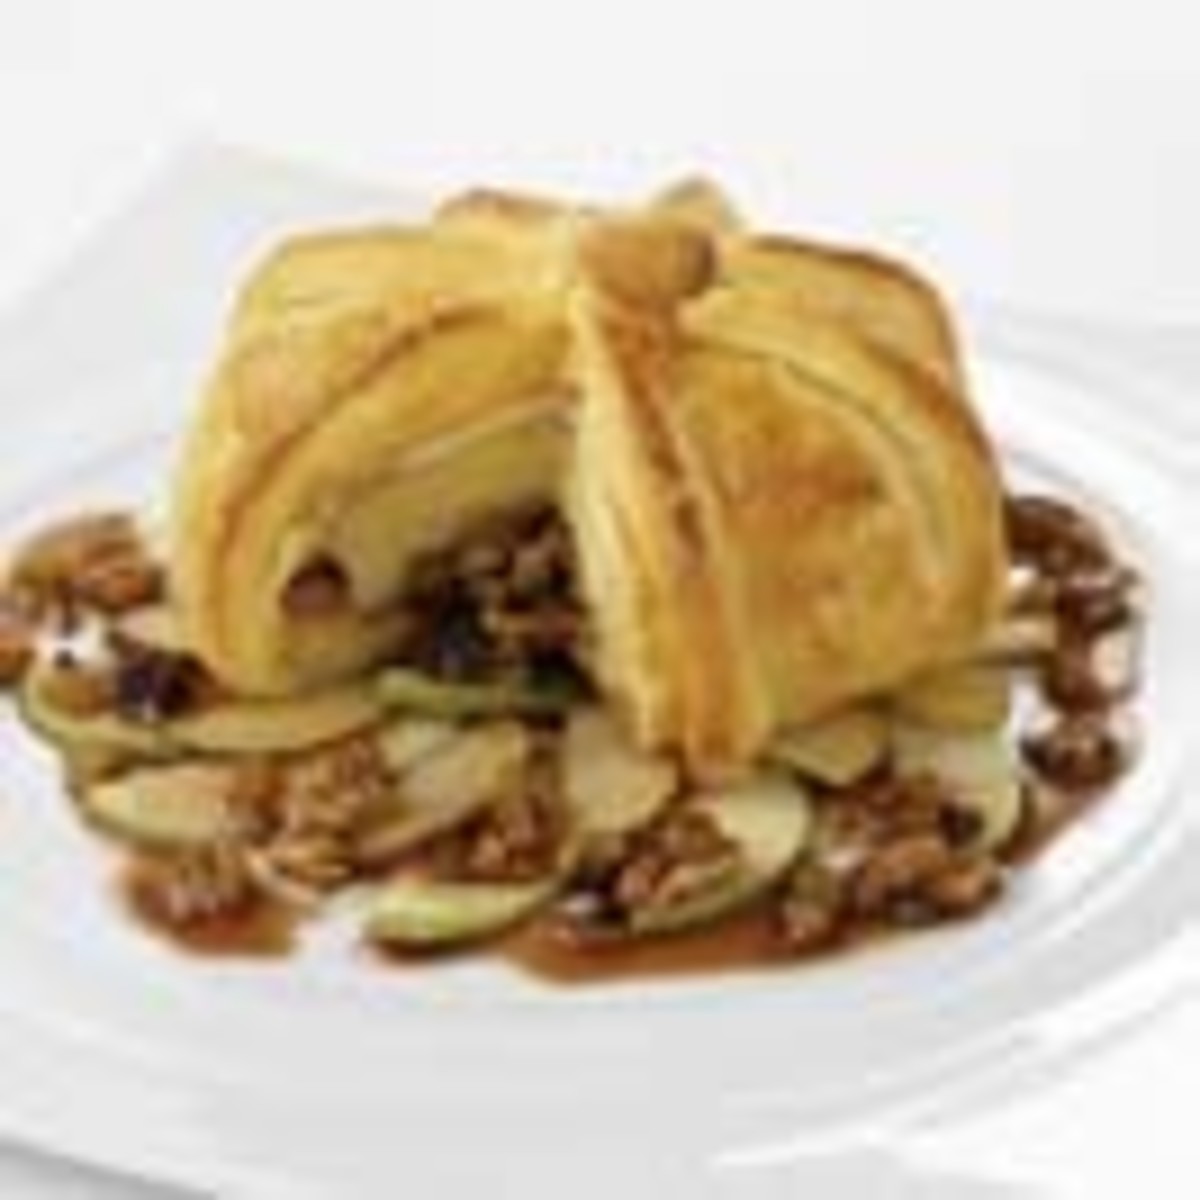 Baked Brie with California Raisins and Port Wine in Puff Pastry